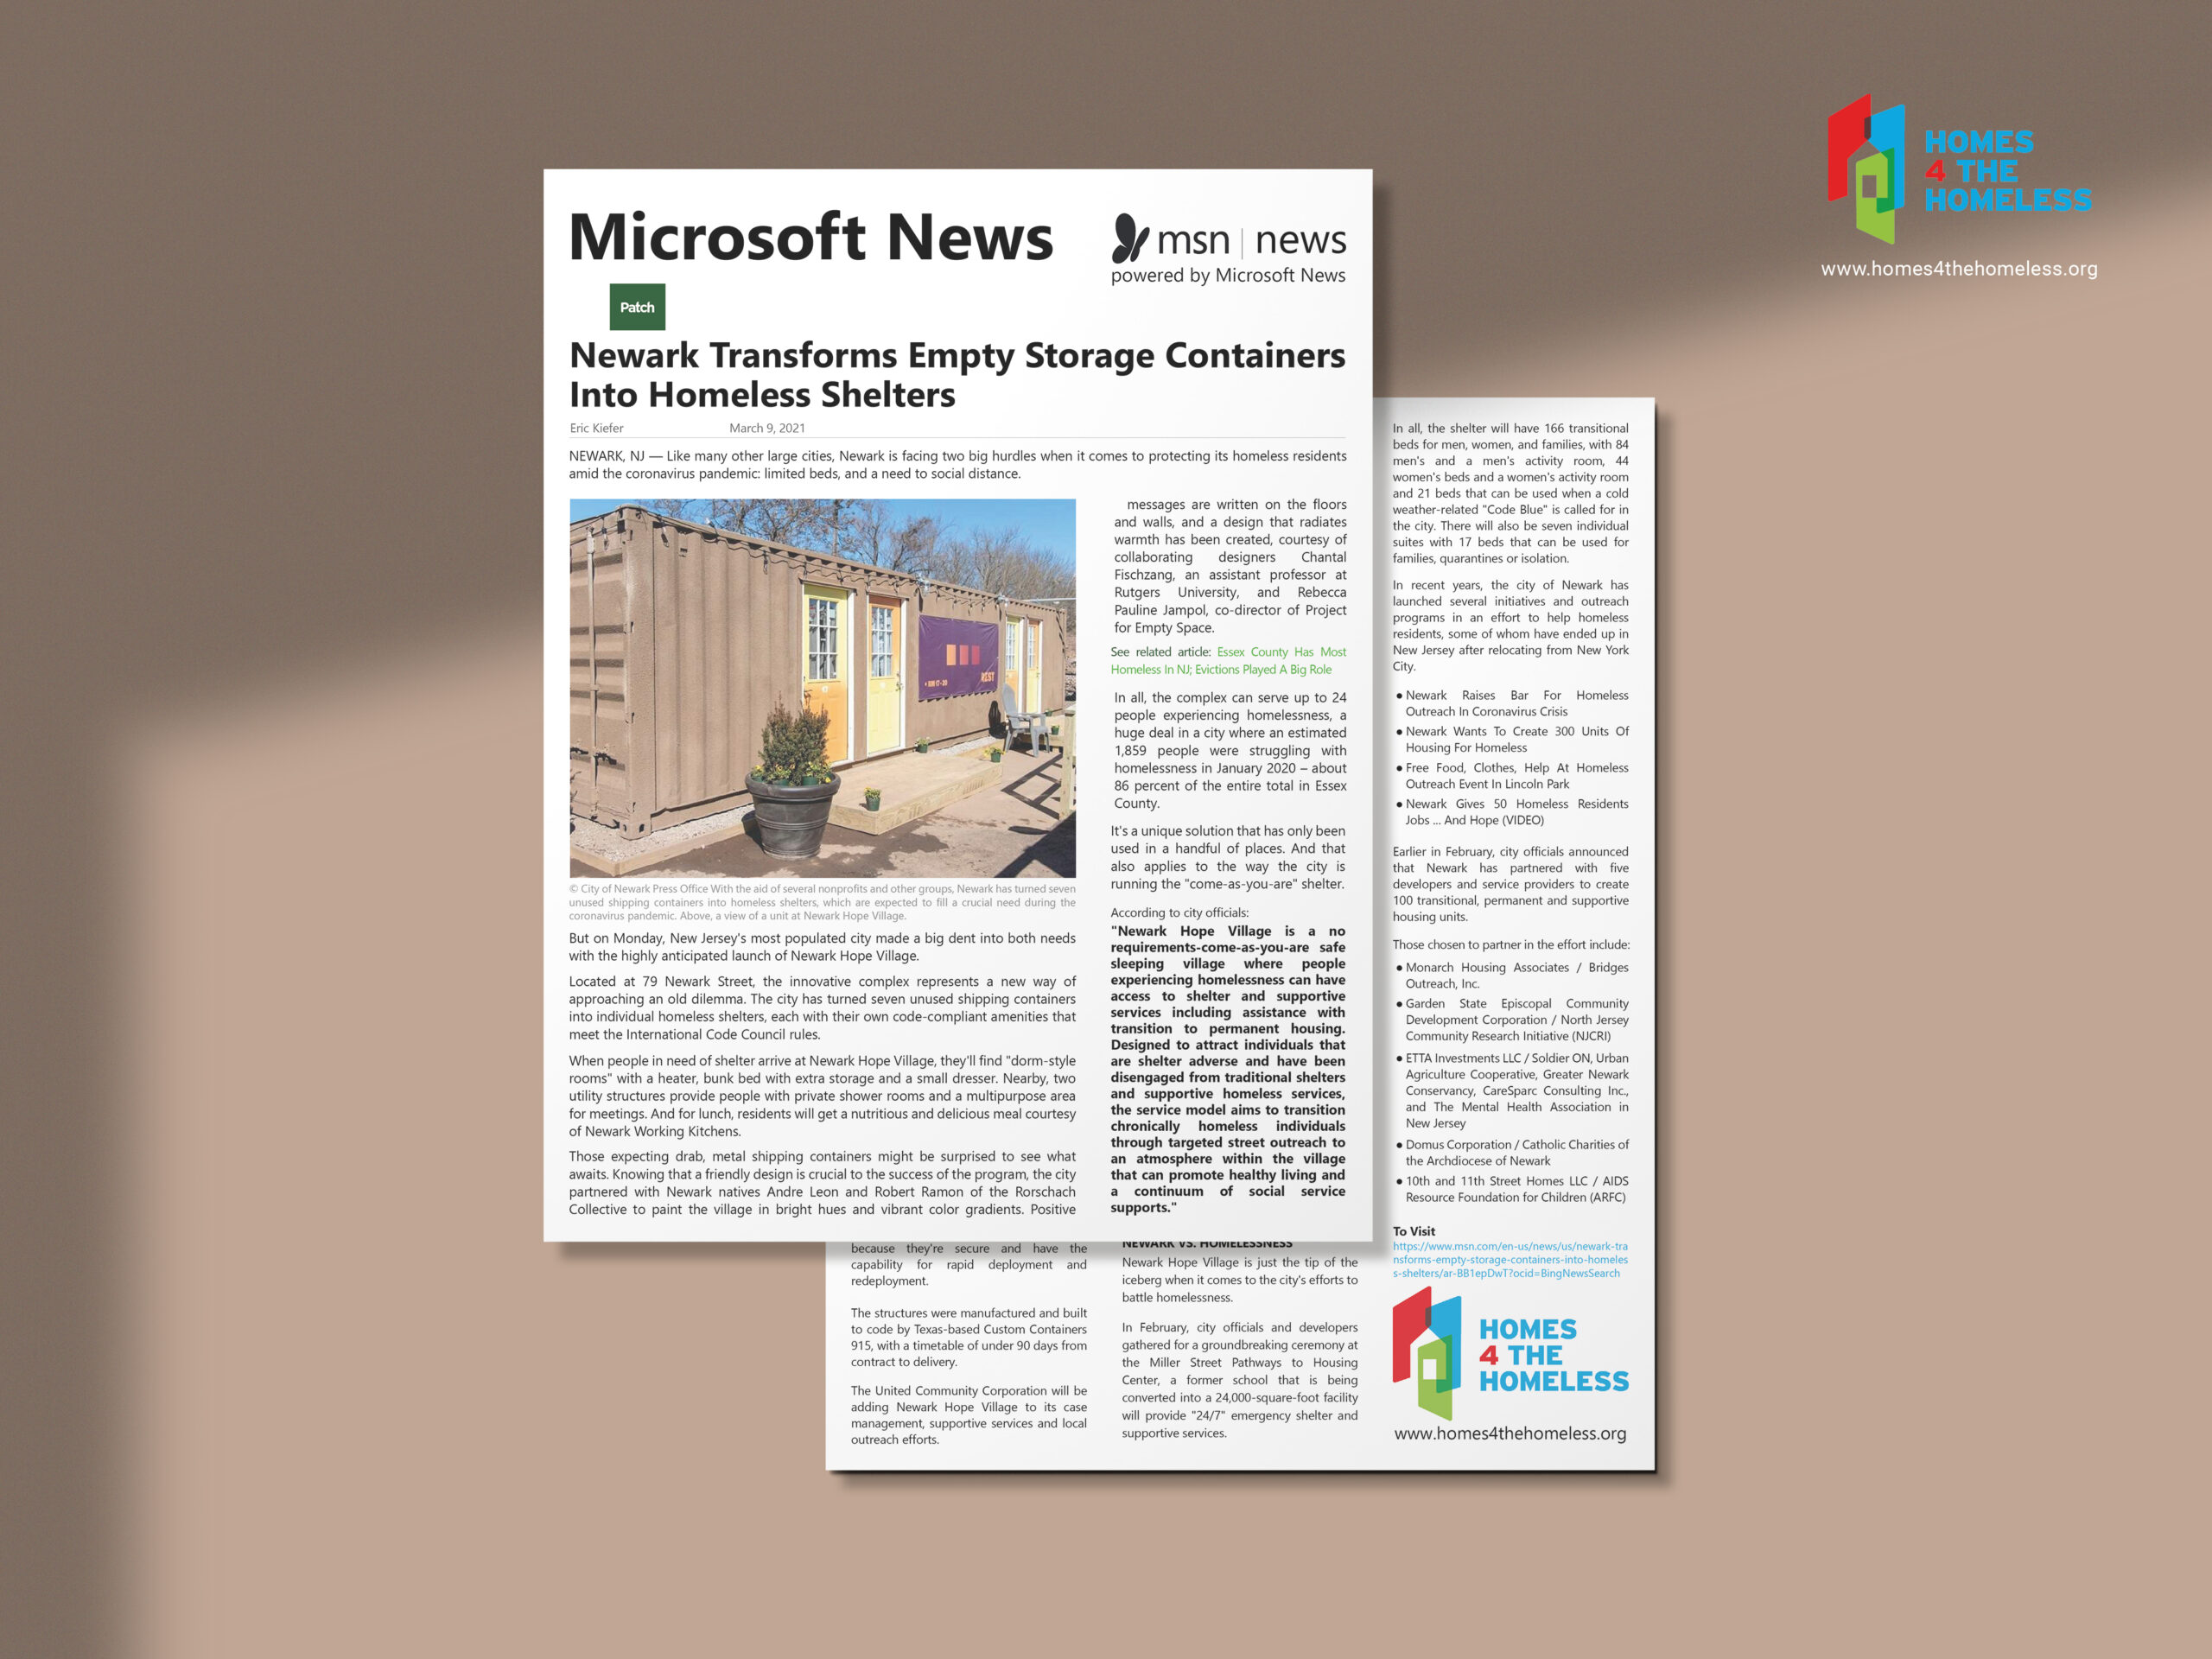 Microsoft News article March 9, 2021 via Patch